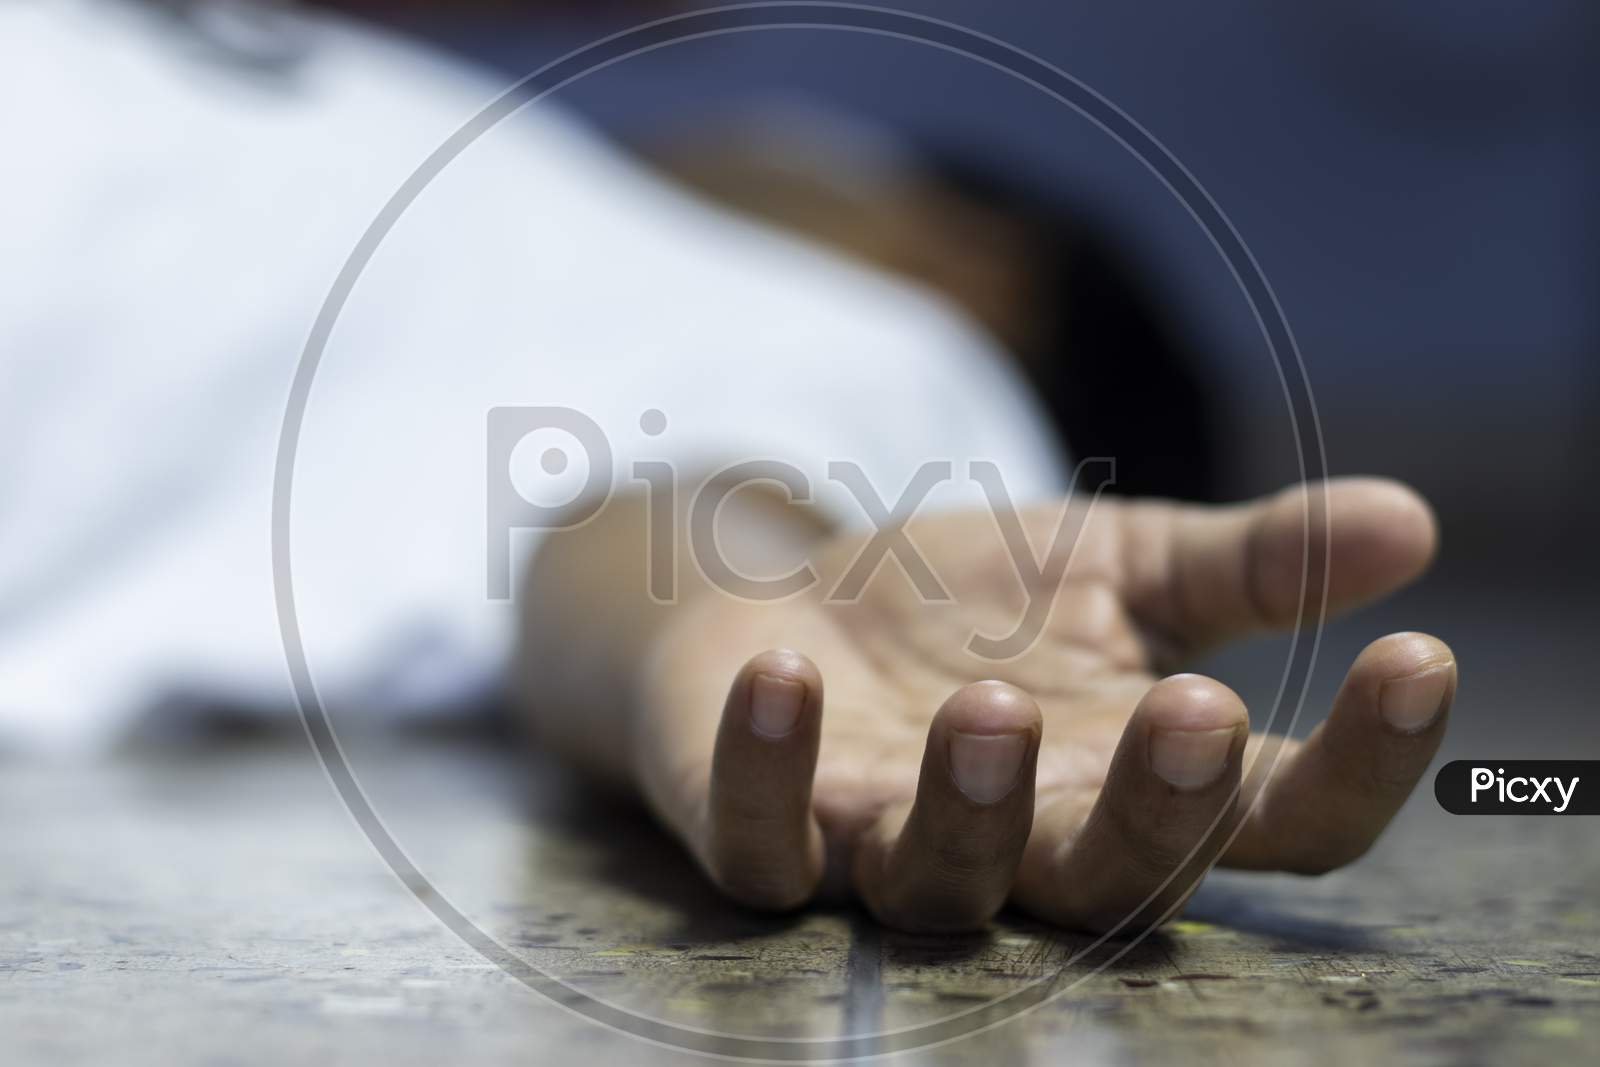 An Indian Or Asian Person Laying On Floor Dead During Covid-19 Or Corona Virus Outbreak With Selective Focus Or Shallow Depth Of Field